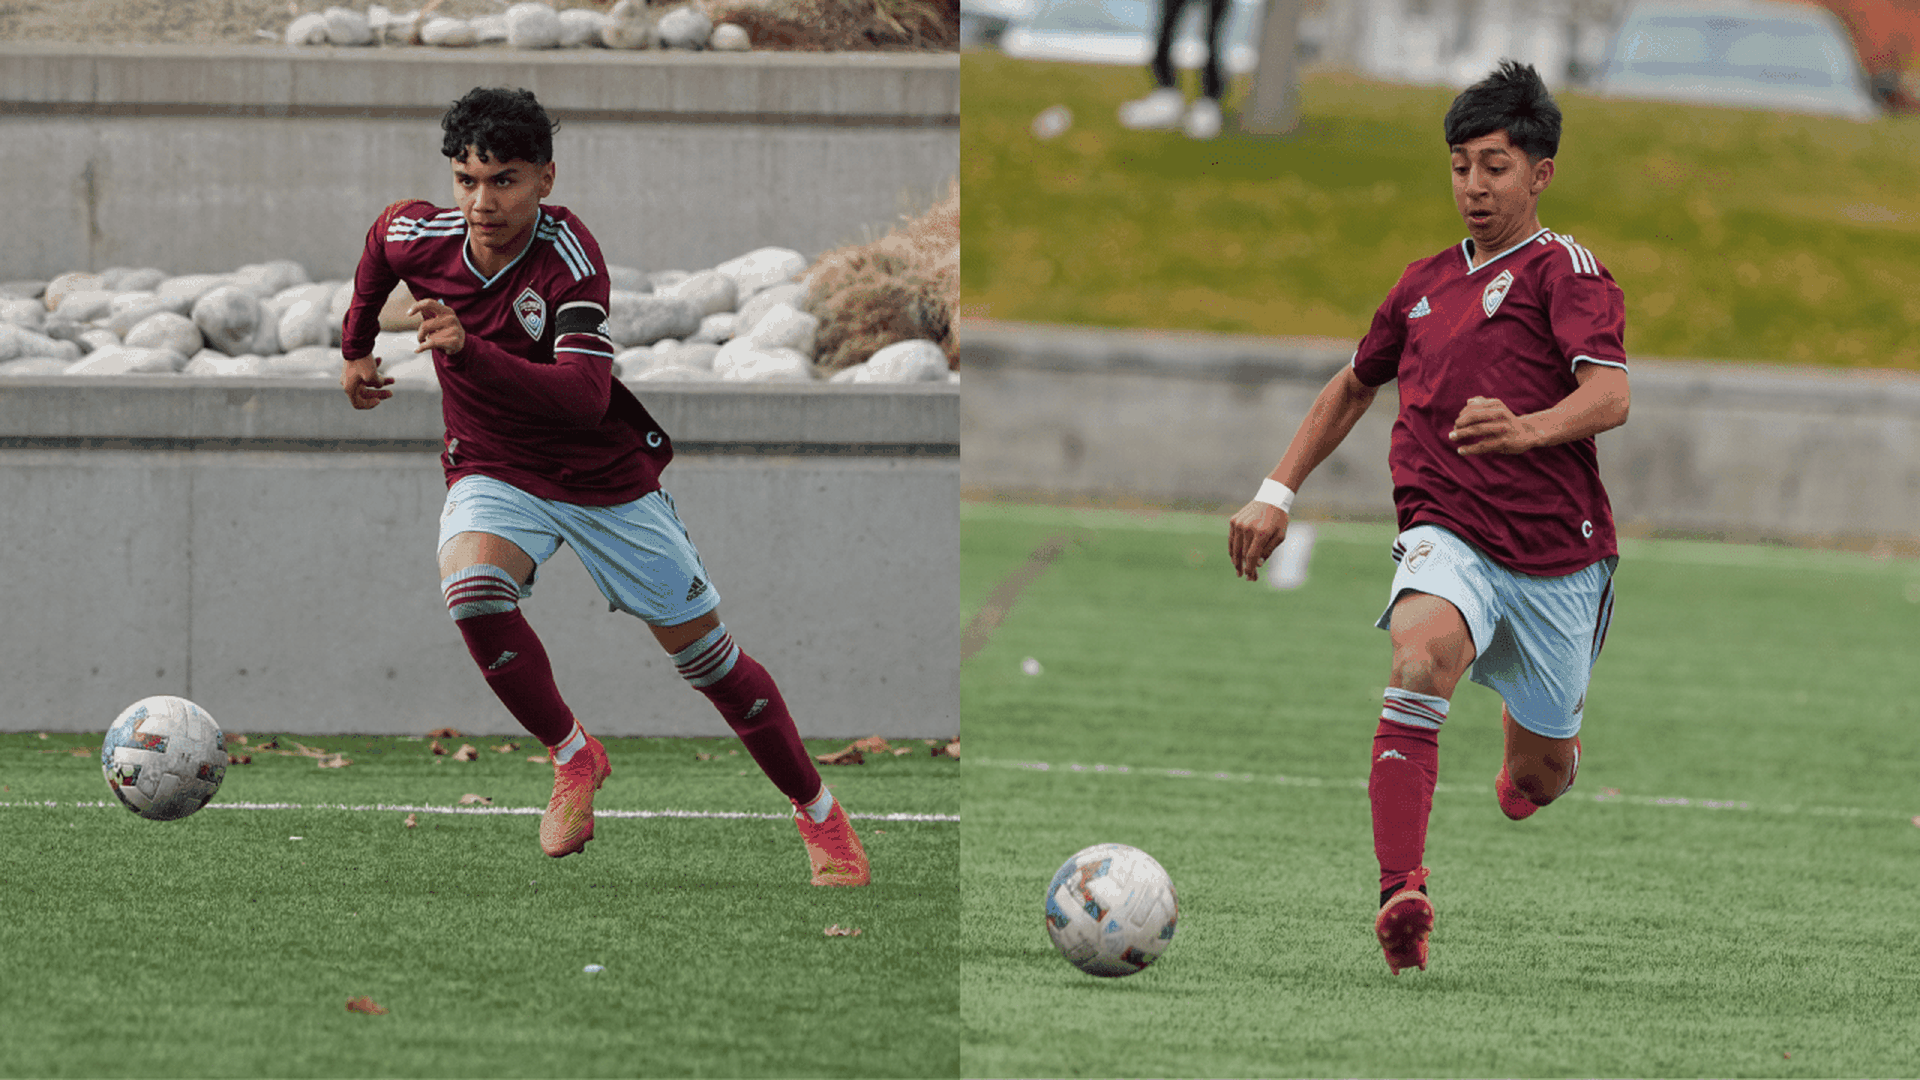 Madera and Acosta represent the Rapids Academy